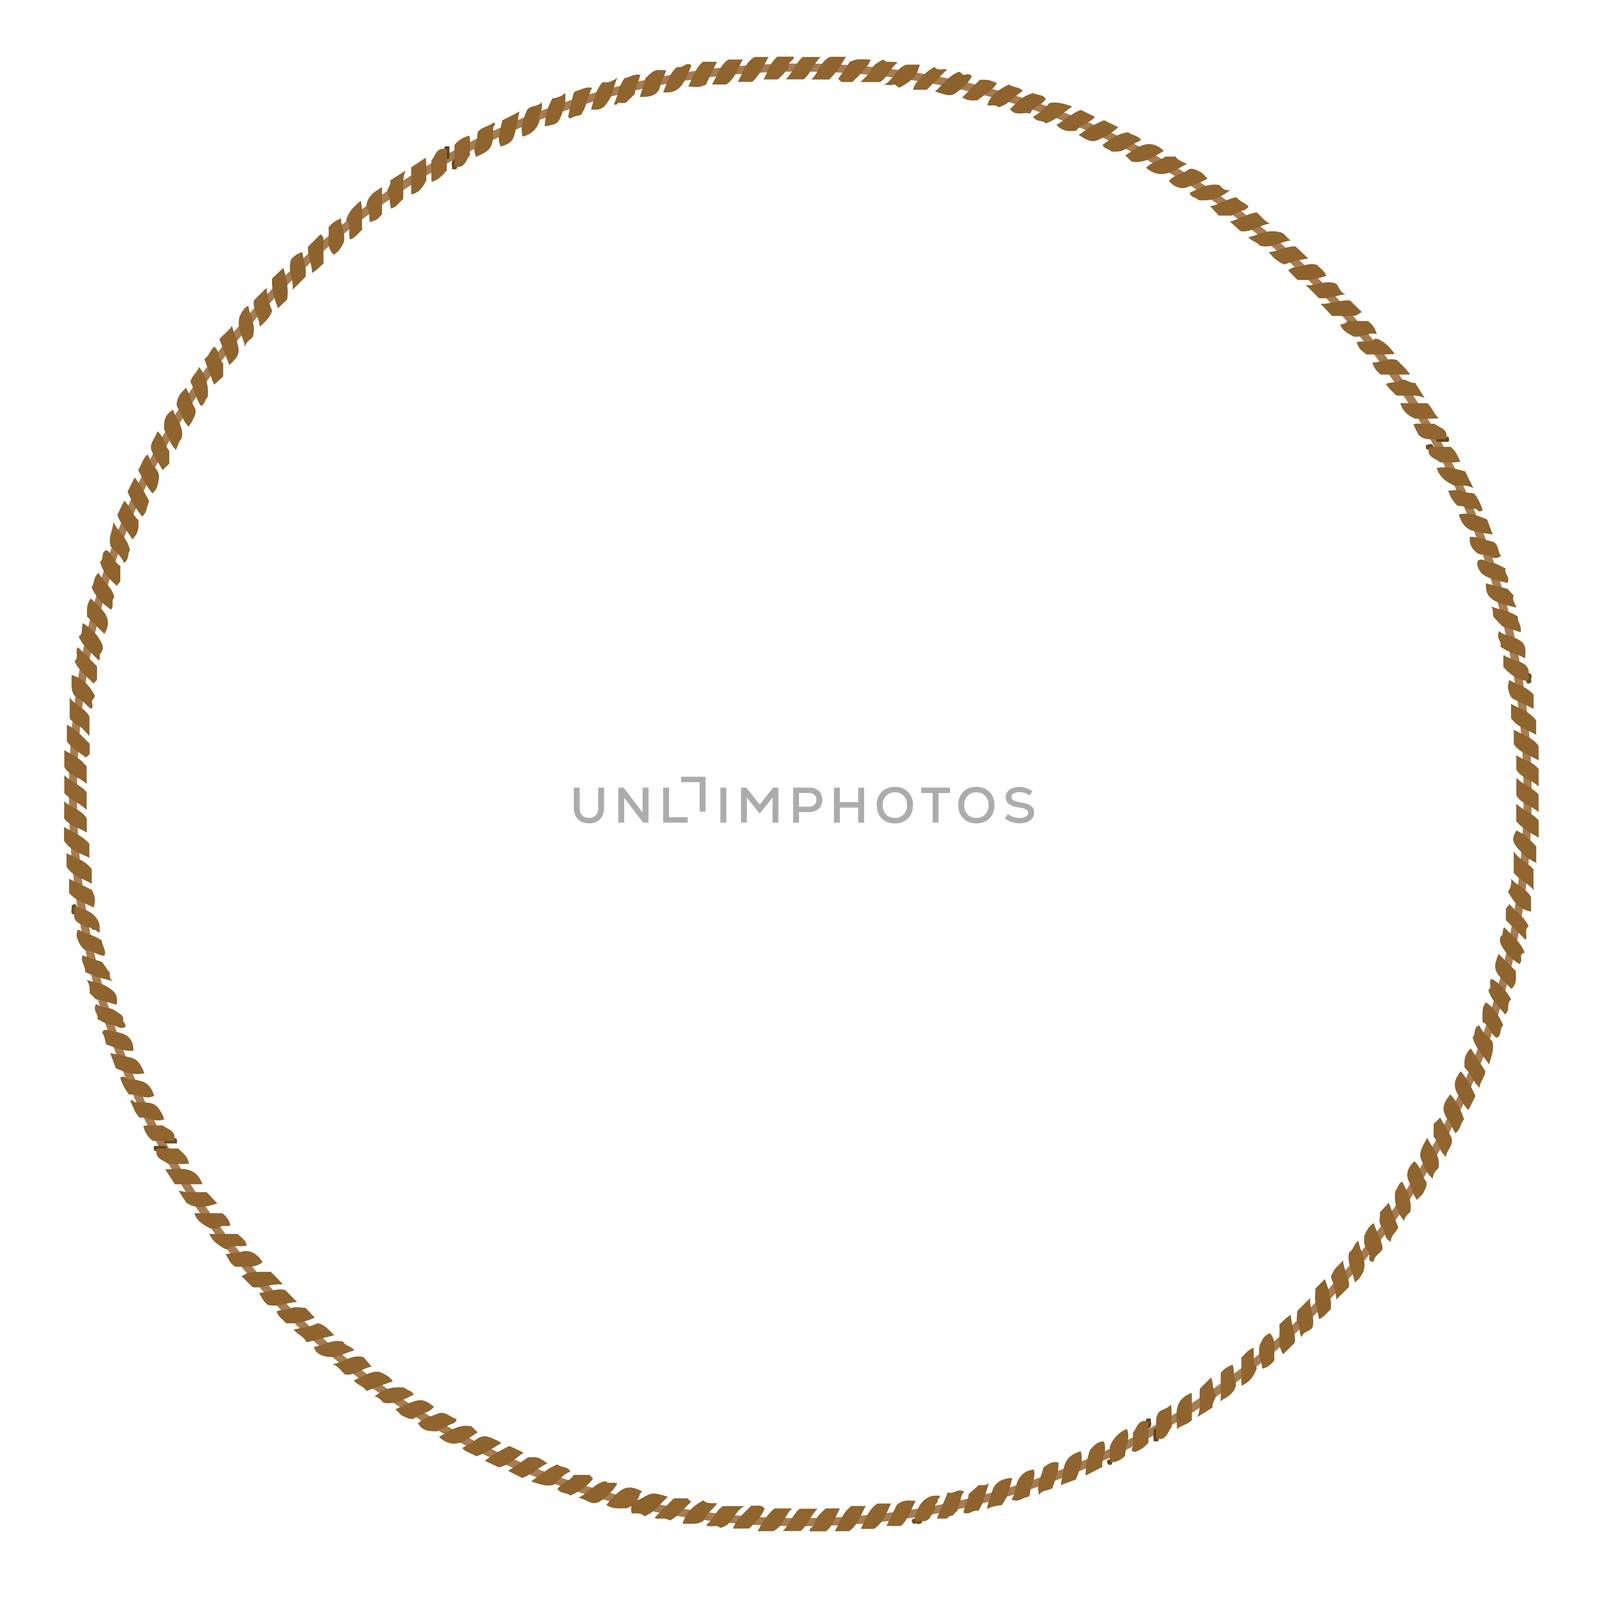 A rope circle as a page border isolated on a white background